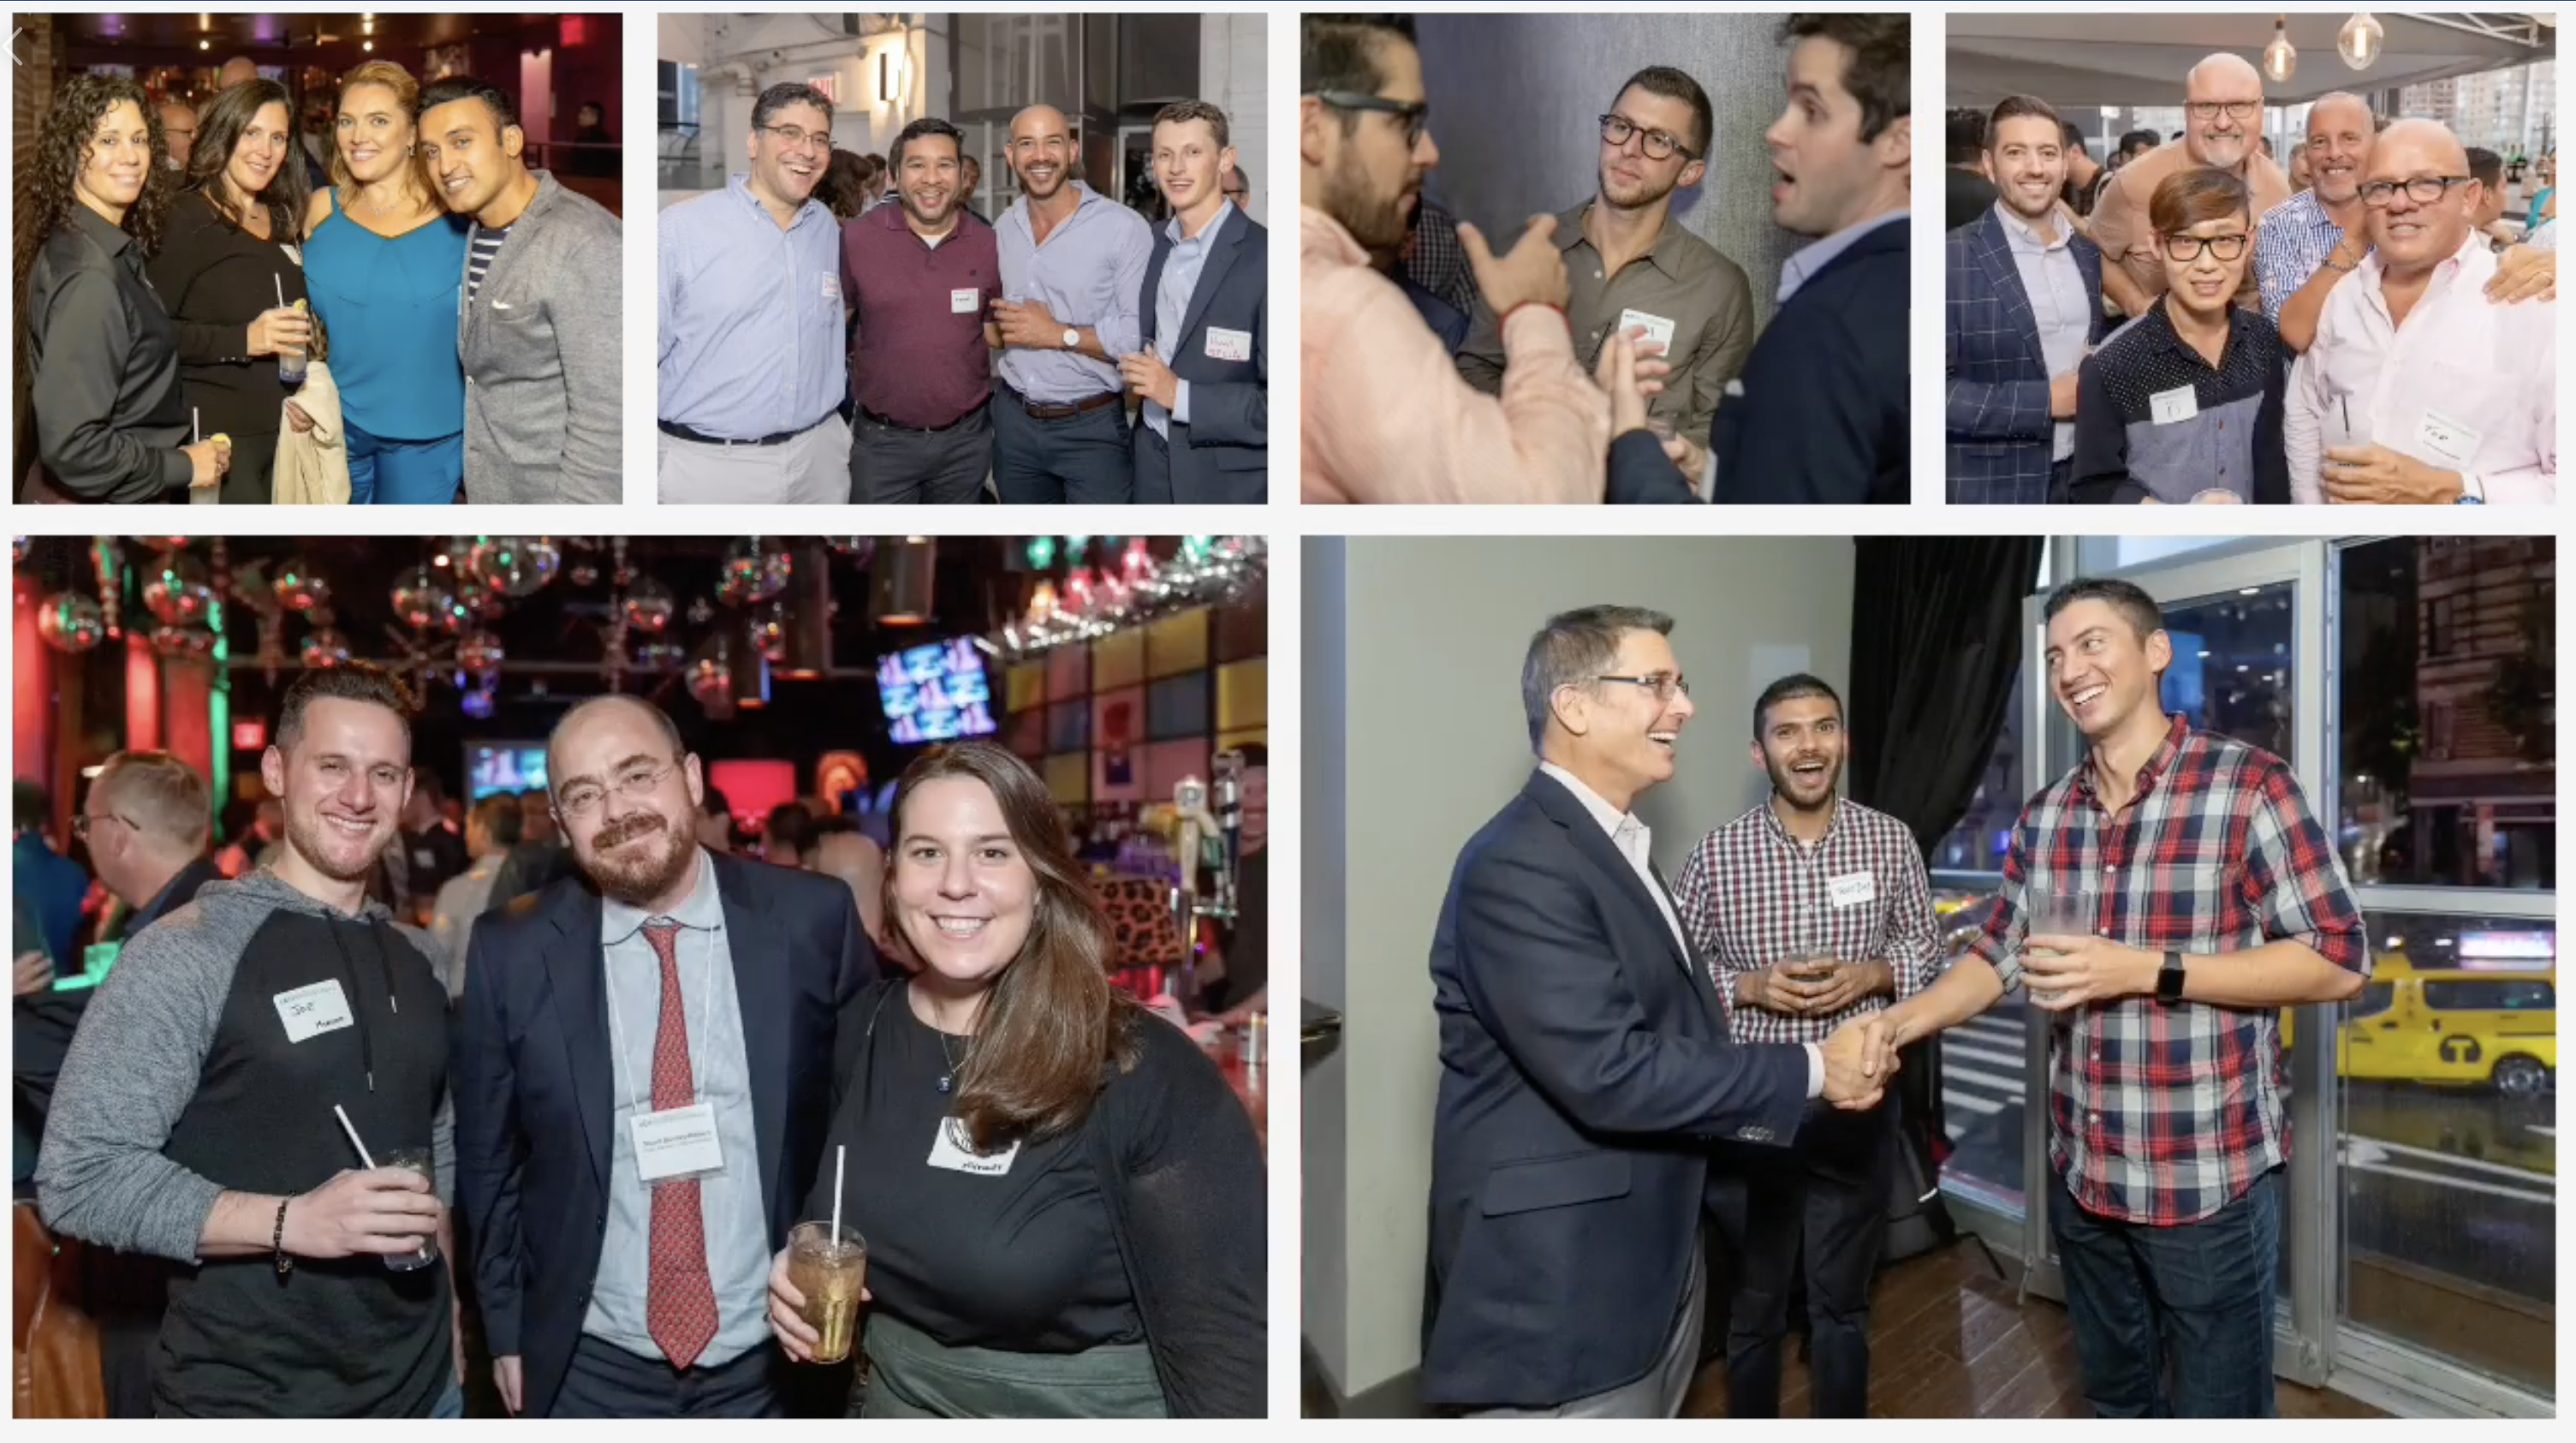 Out Pro Lounge - Networking Mixer for LGBTQ Professionals